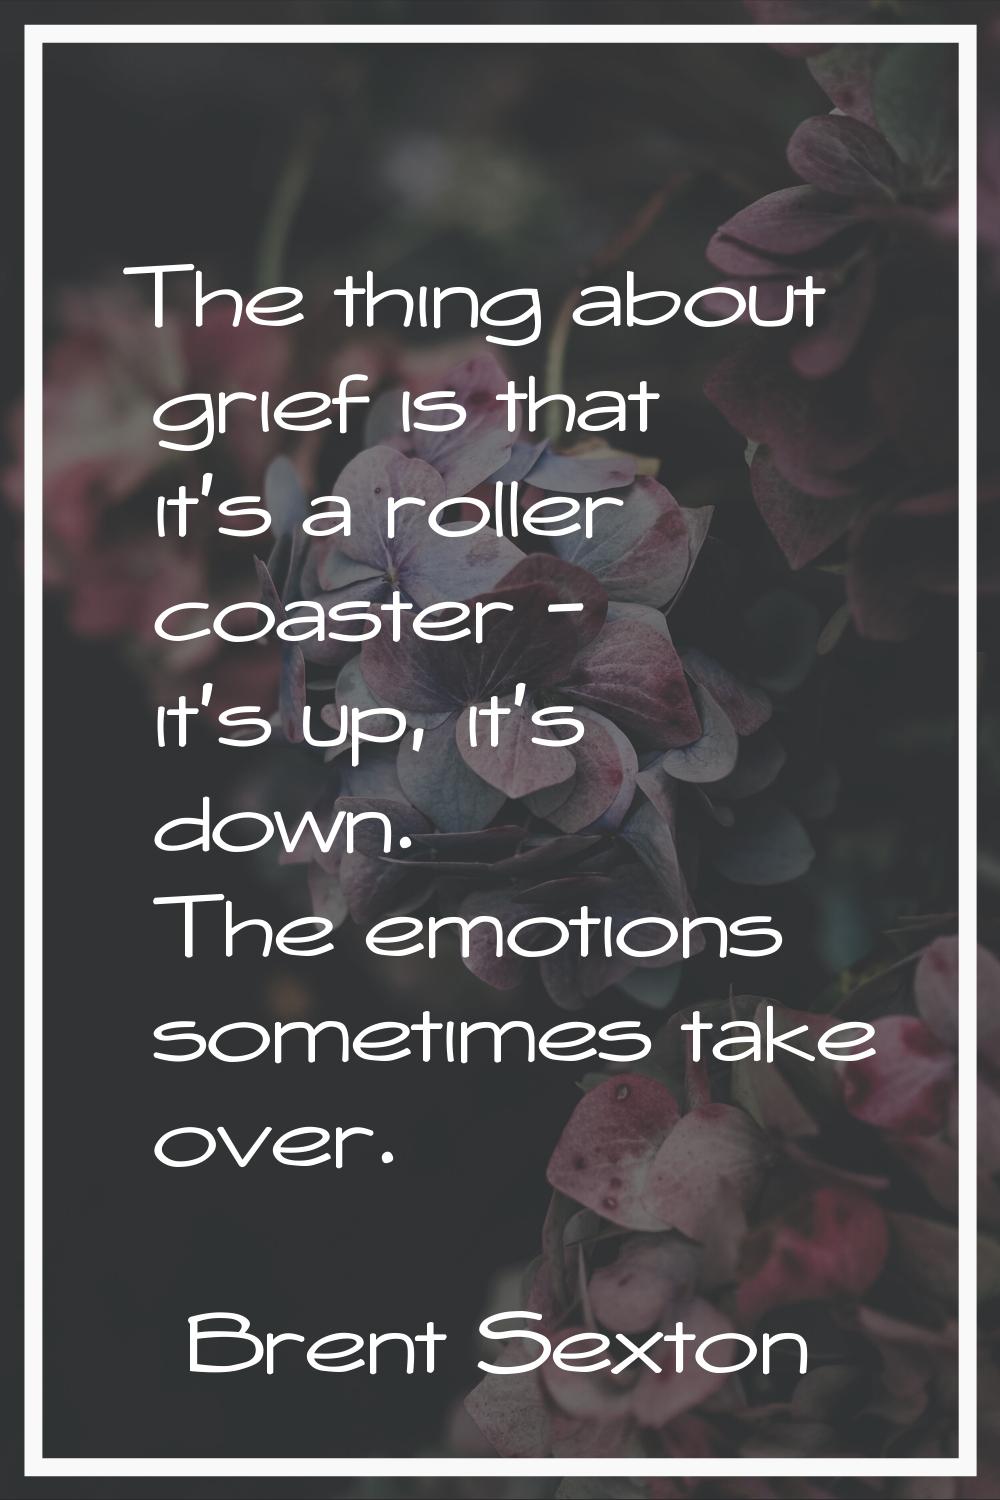 The thing about grief is that it's a roller coaster - it's up, it's down. The emotions sometimes ta